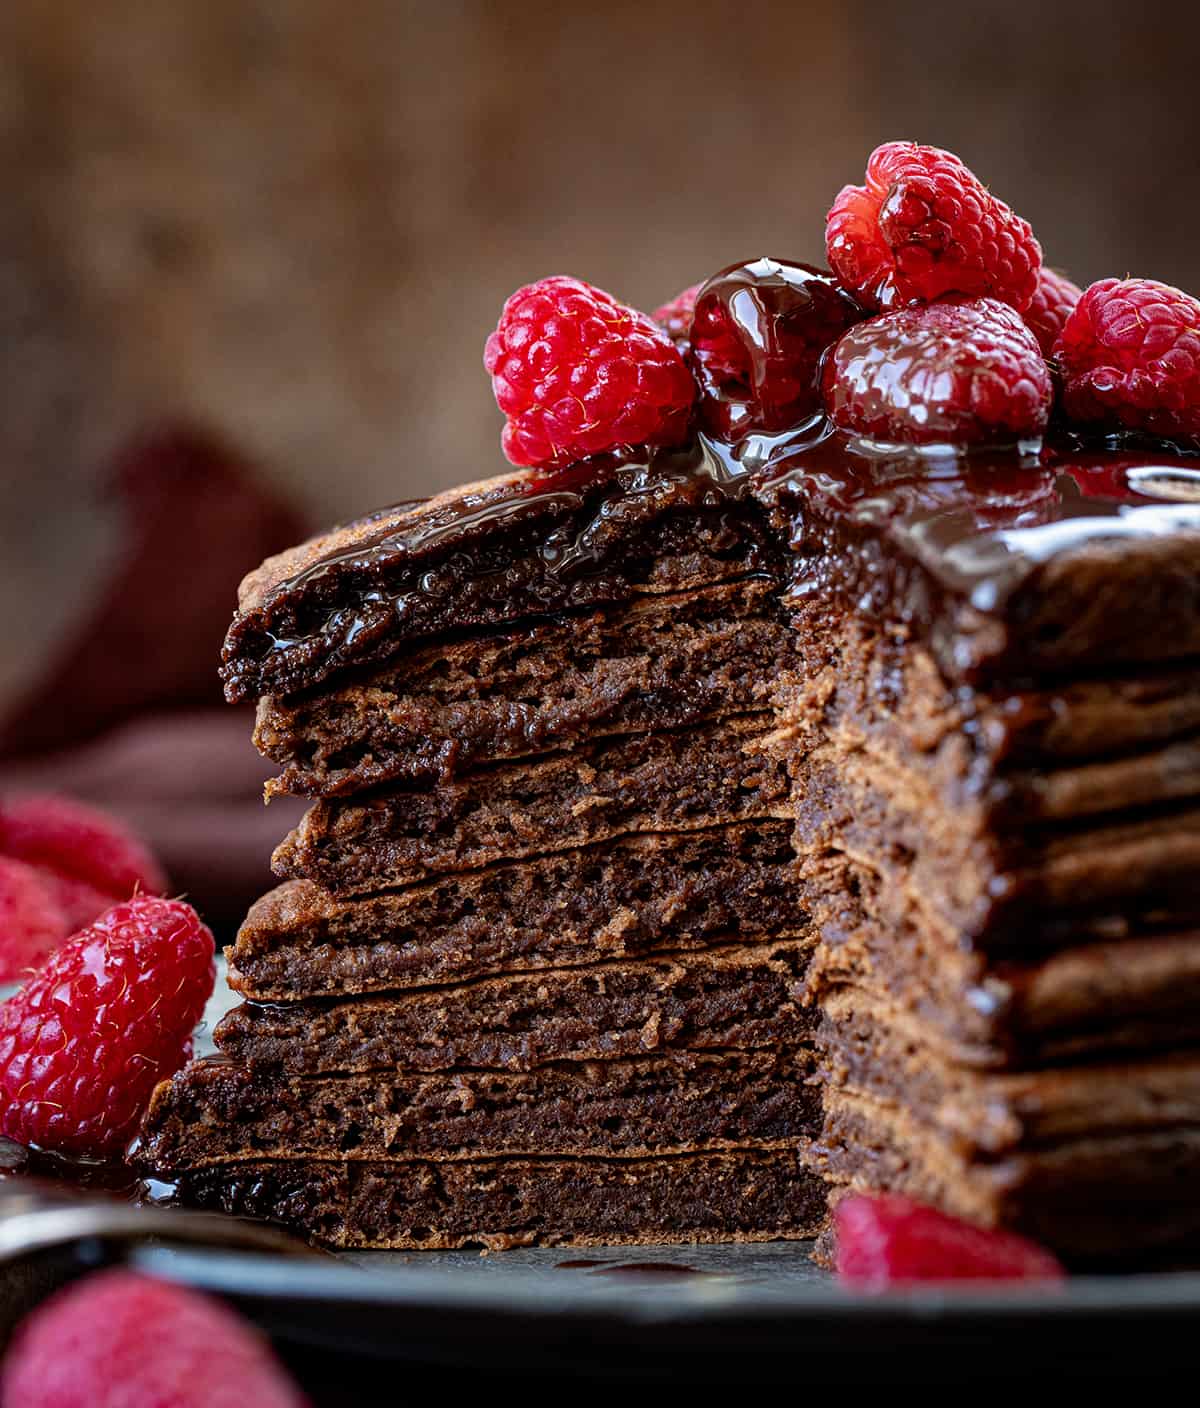 Stack of Chocolate Pancakes with bites removed showing inside texture.